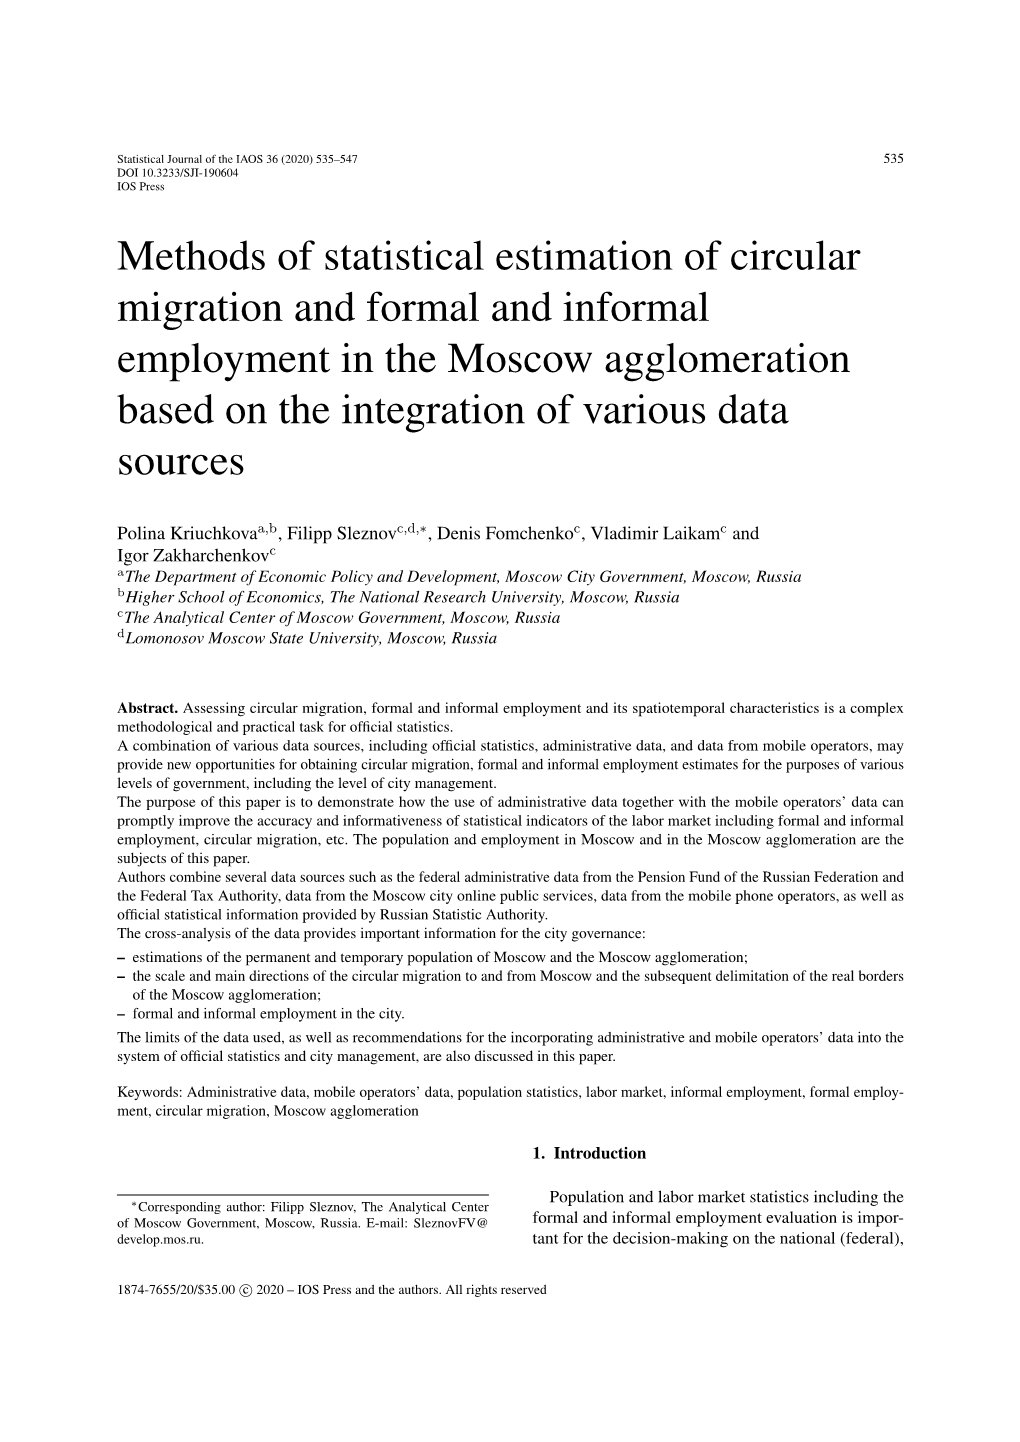 Methods of Statistical Estimation of Circular Migration and Formal And